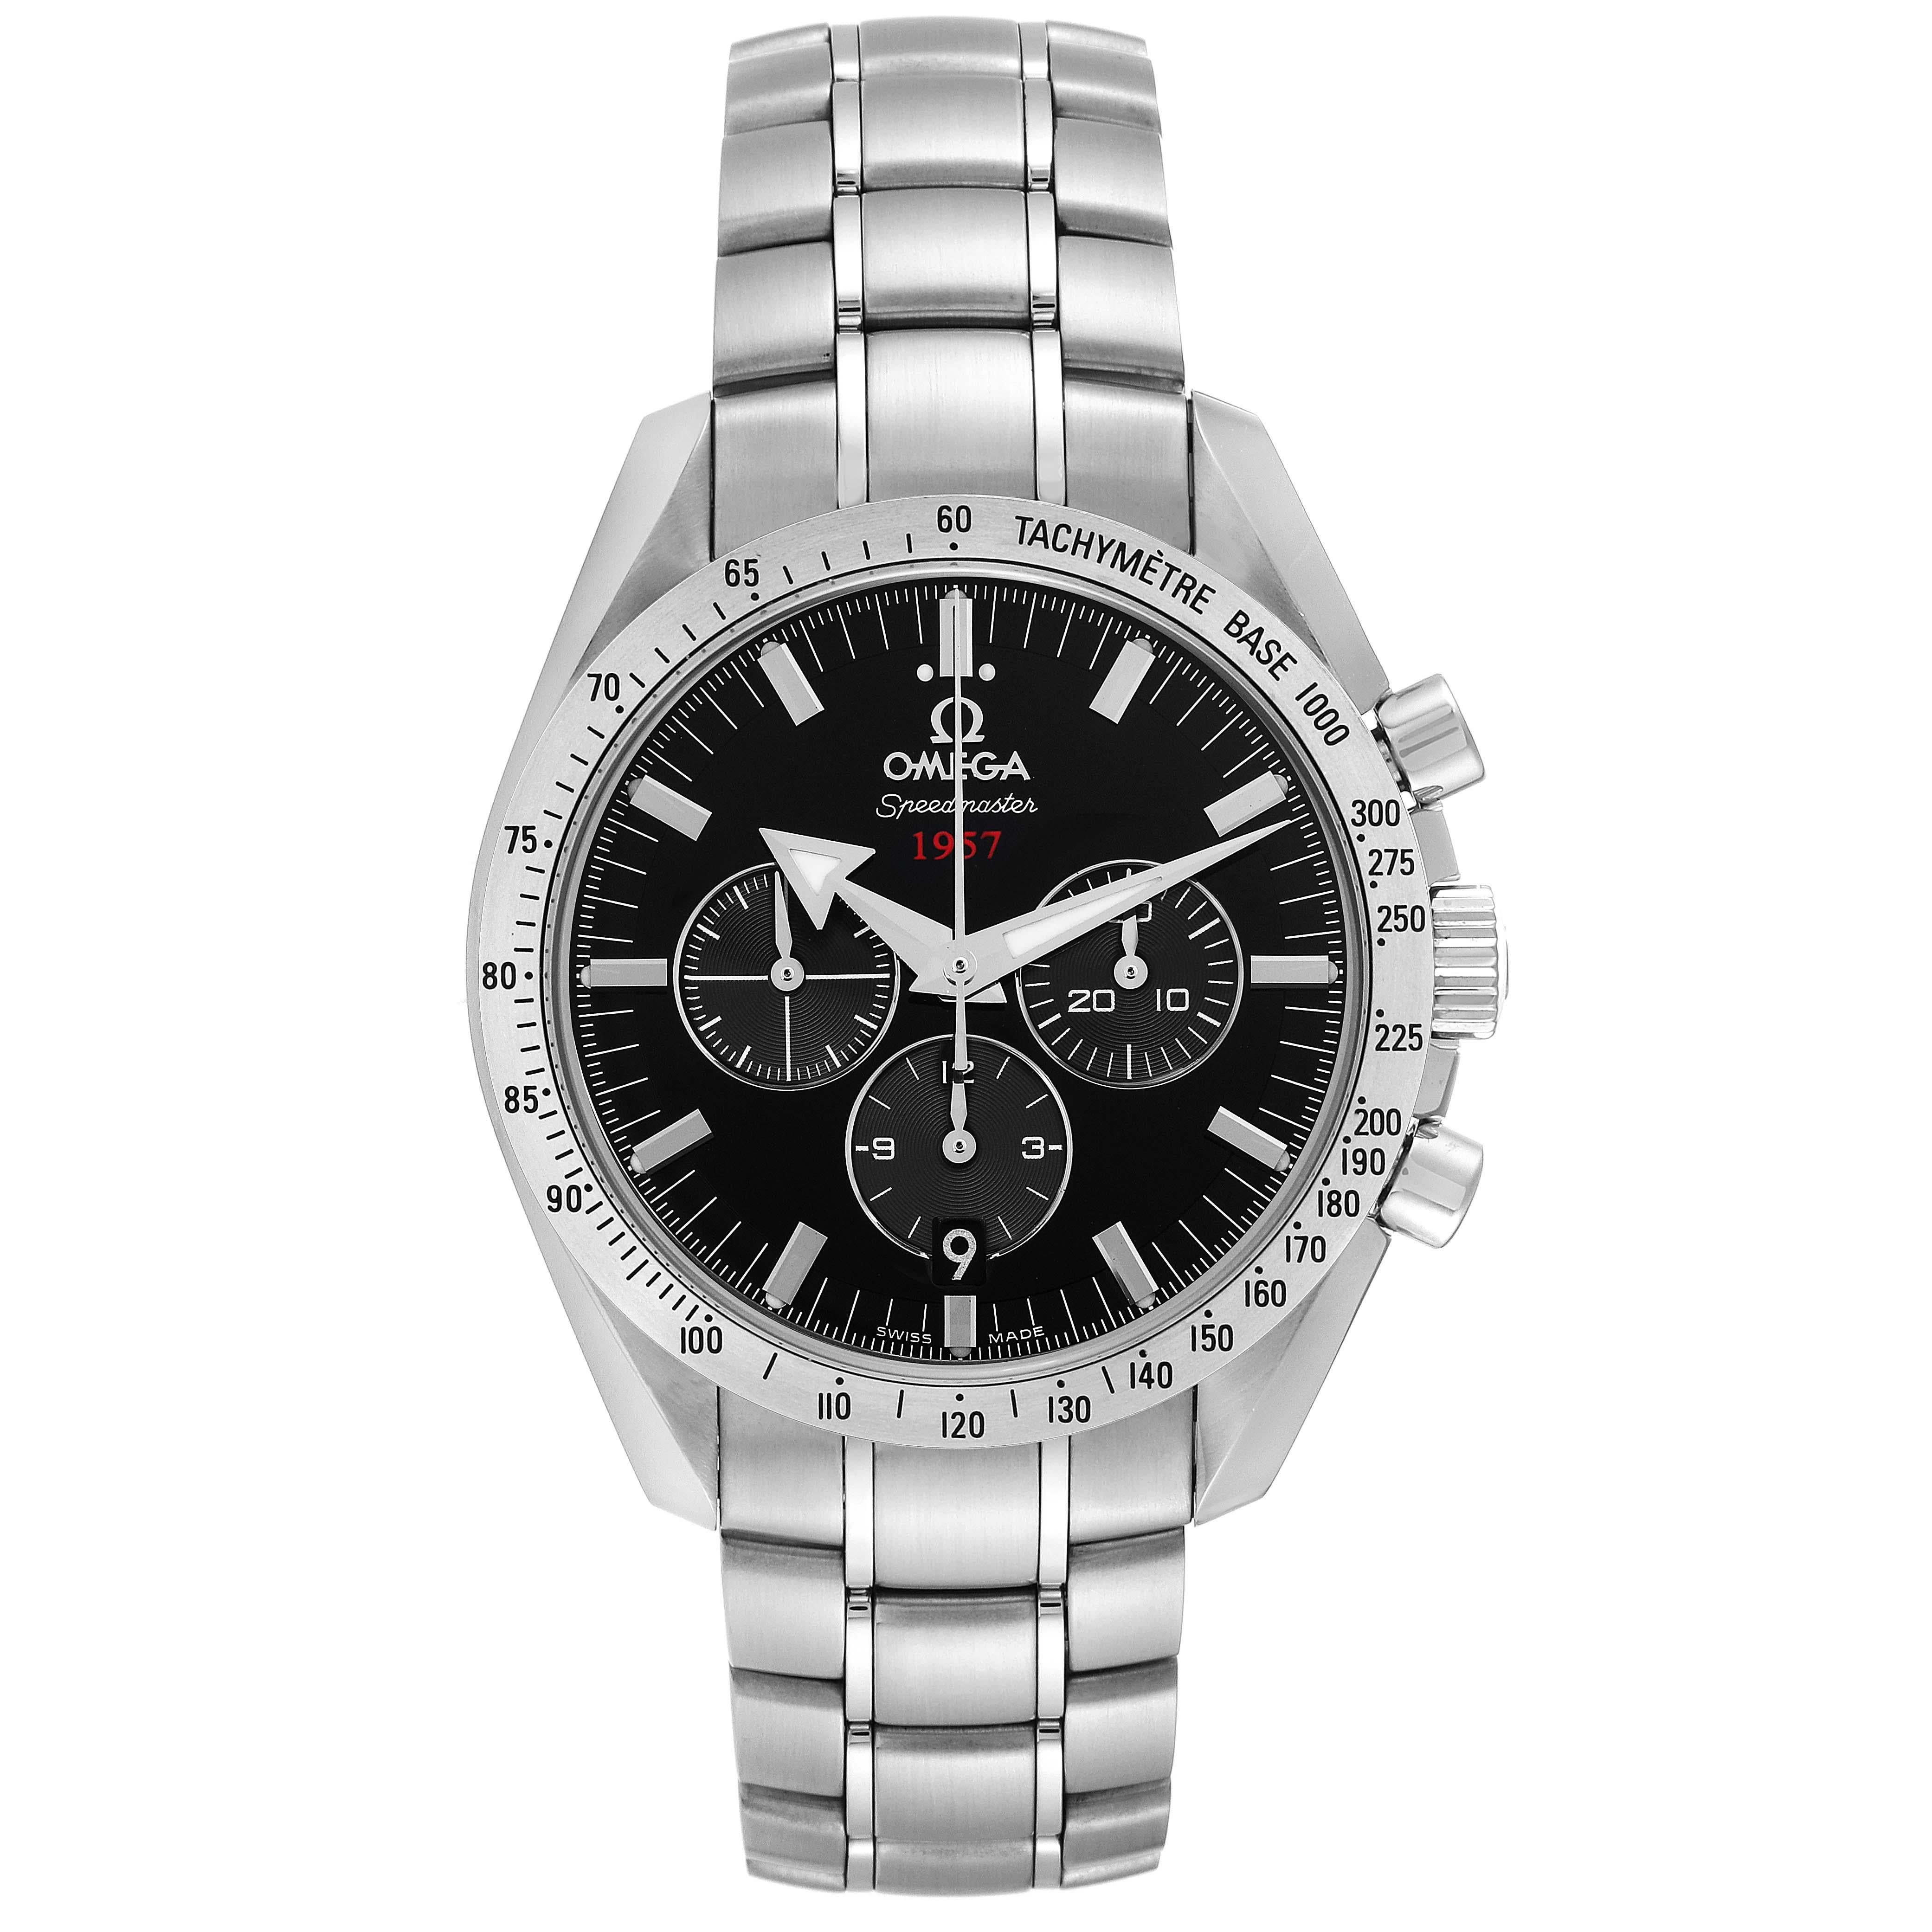 Omega Speedmaster Broad Arrow 1957 Steel Mens Watch 321.10.42.50.01.001 Box Card. Automatic self-winding chronograph movement with column wheel mechanism and Co-Axial Escapement. Stainless steel round case 42.0 mm in diameter. Transparent exhibition